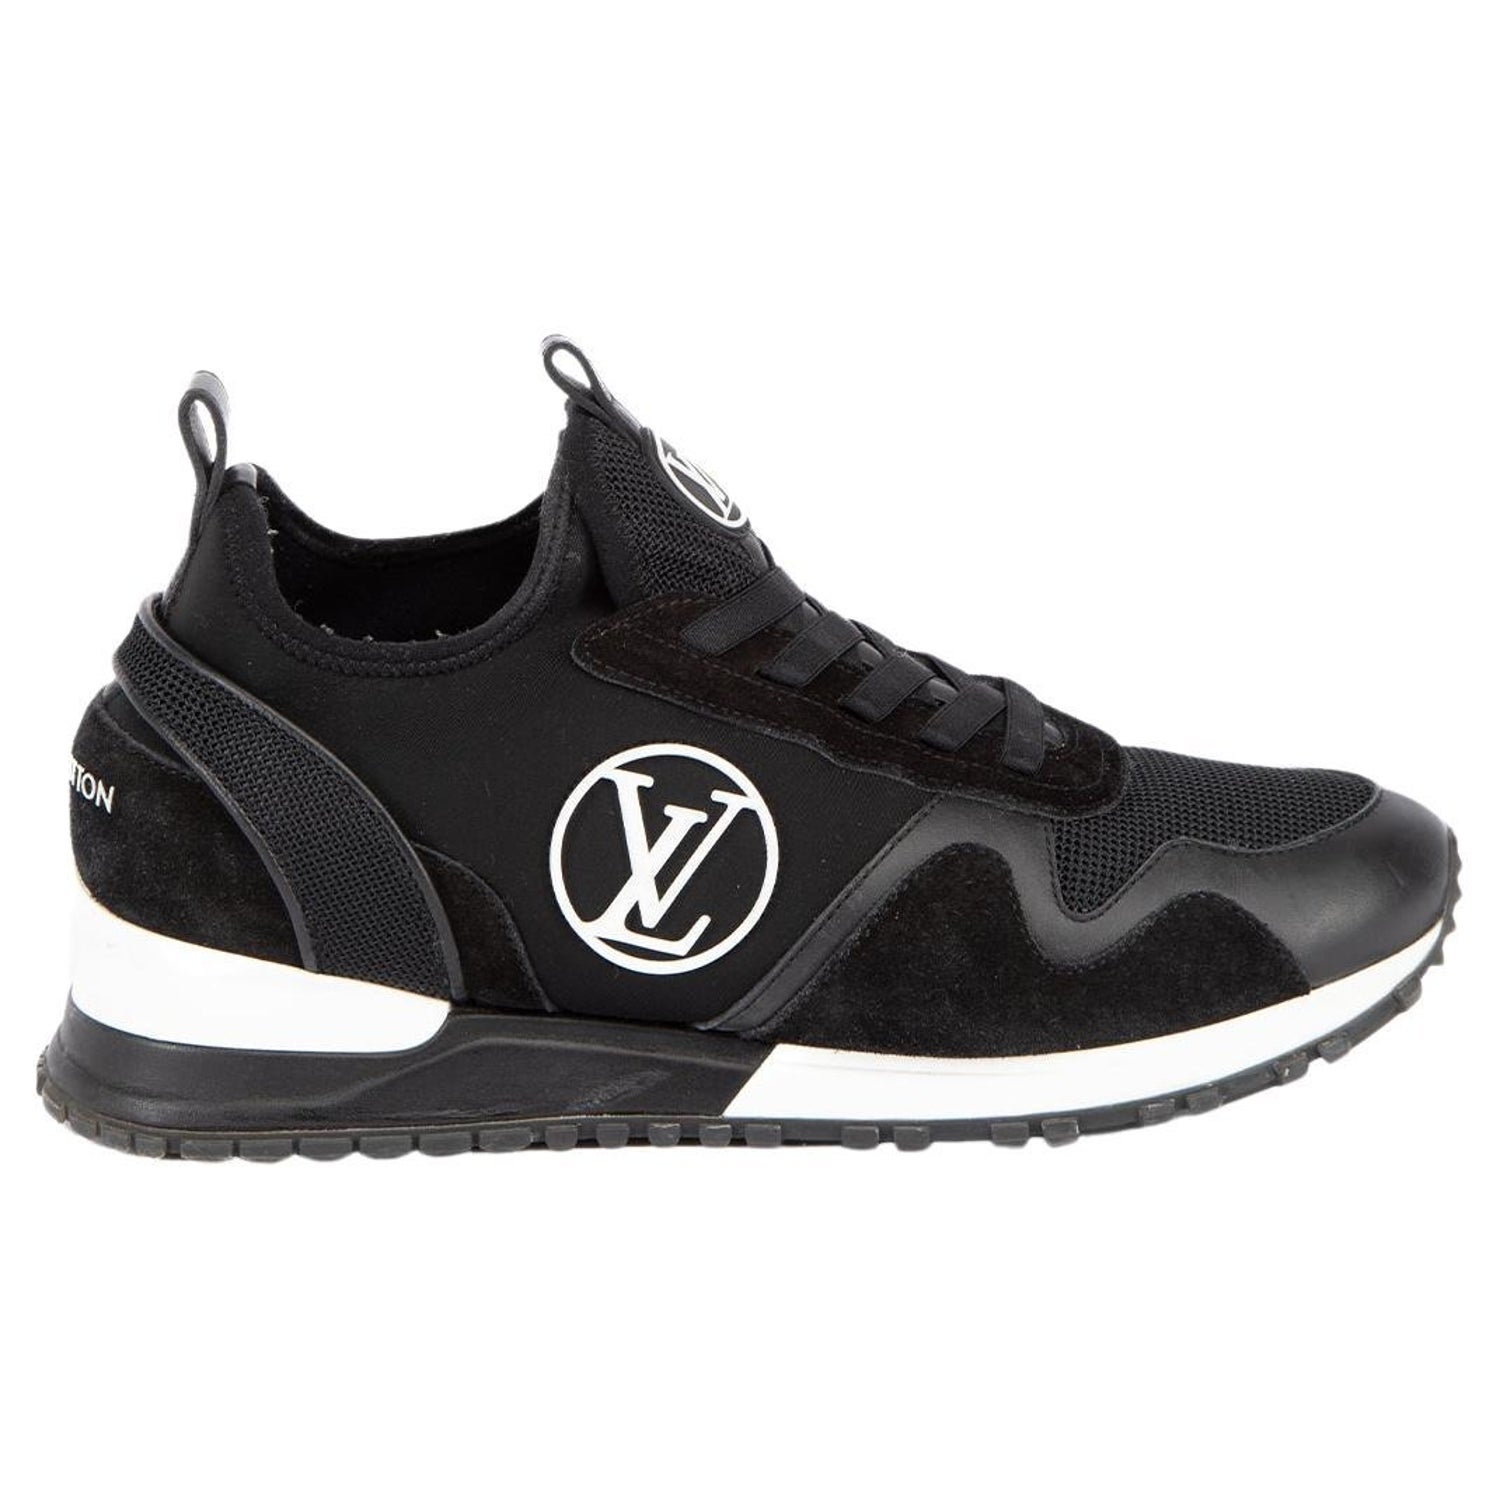 Louis Vuitton - Authenticated Trainer - Leather Black for Women, Very Good Condition